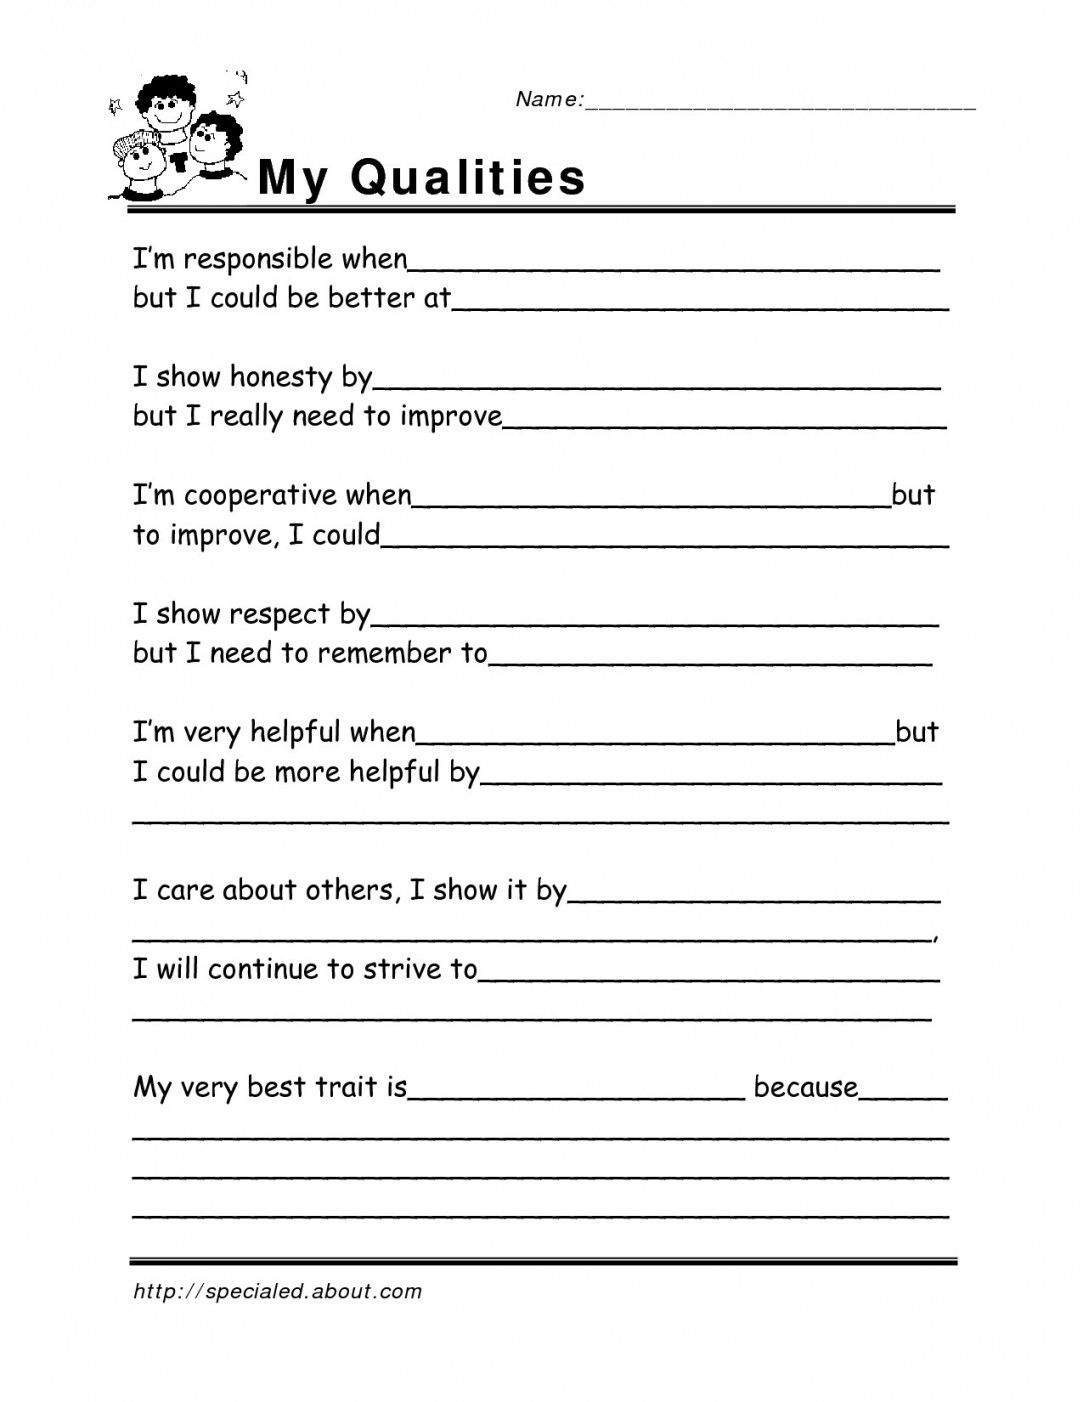 Free Printable Life Skills Worksheets | Lostranquillos - Free | Free Printable Life Skills Worksheets For Adults